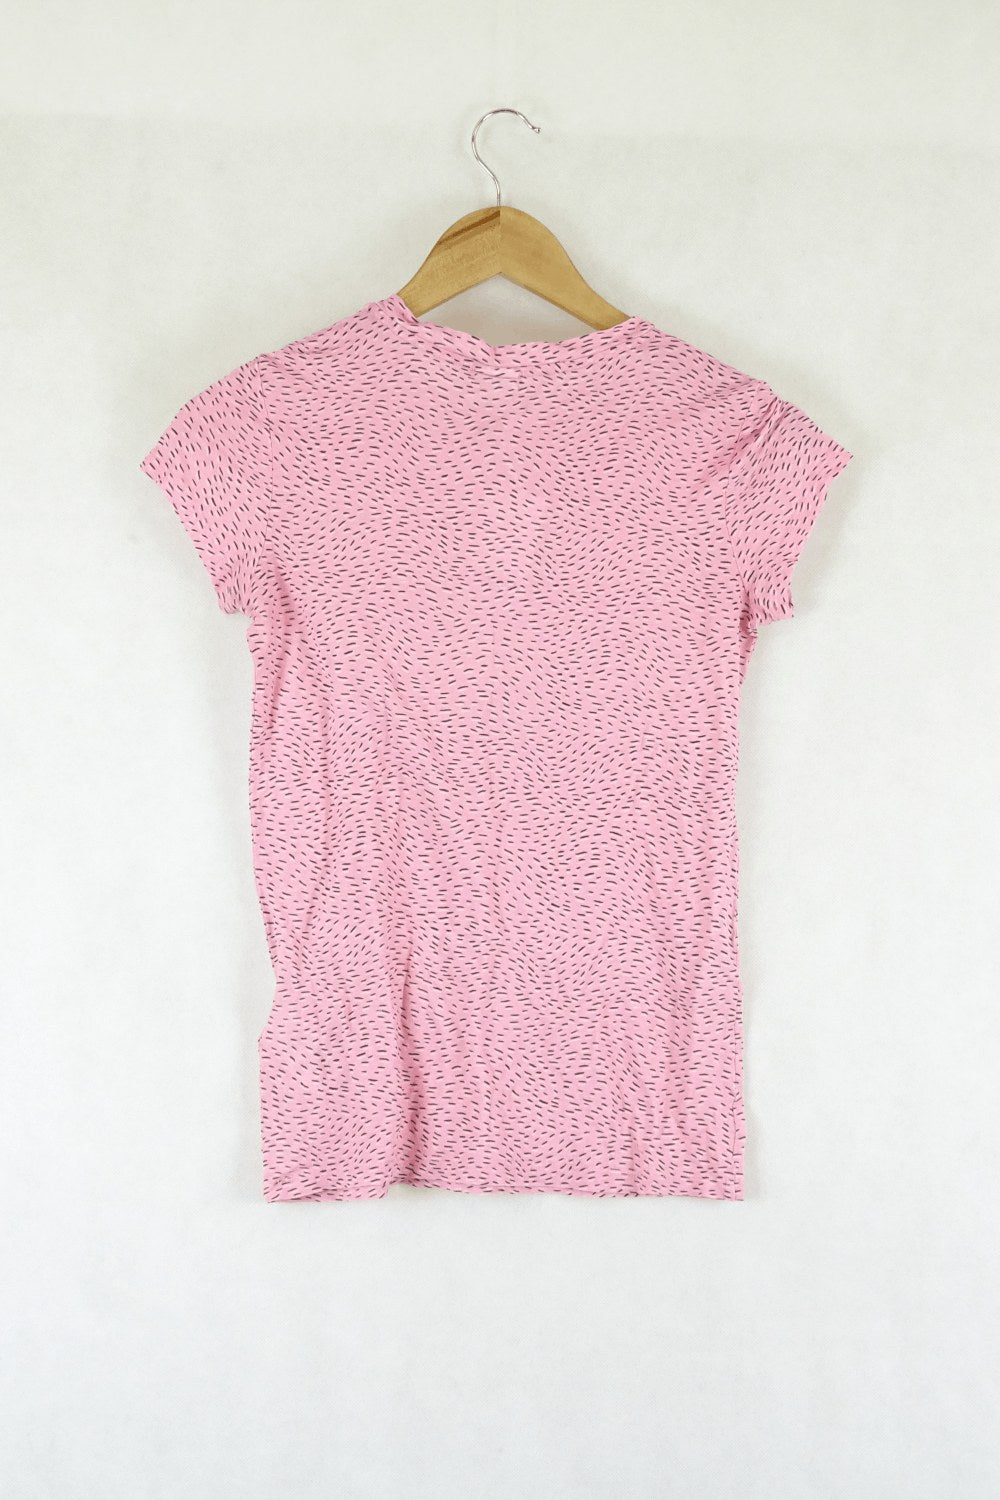 & Other Stories Pink Pattern Top 4